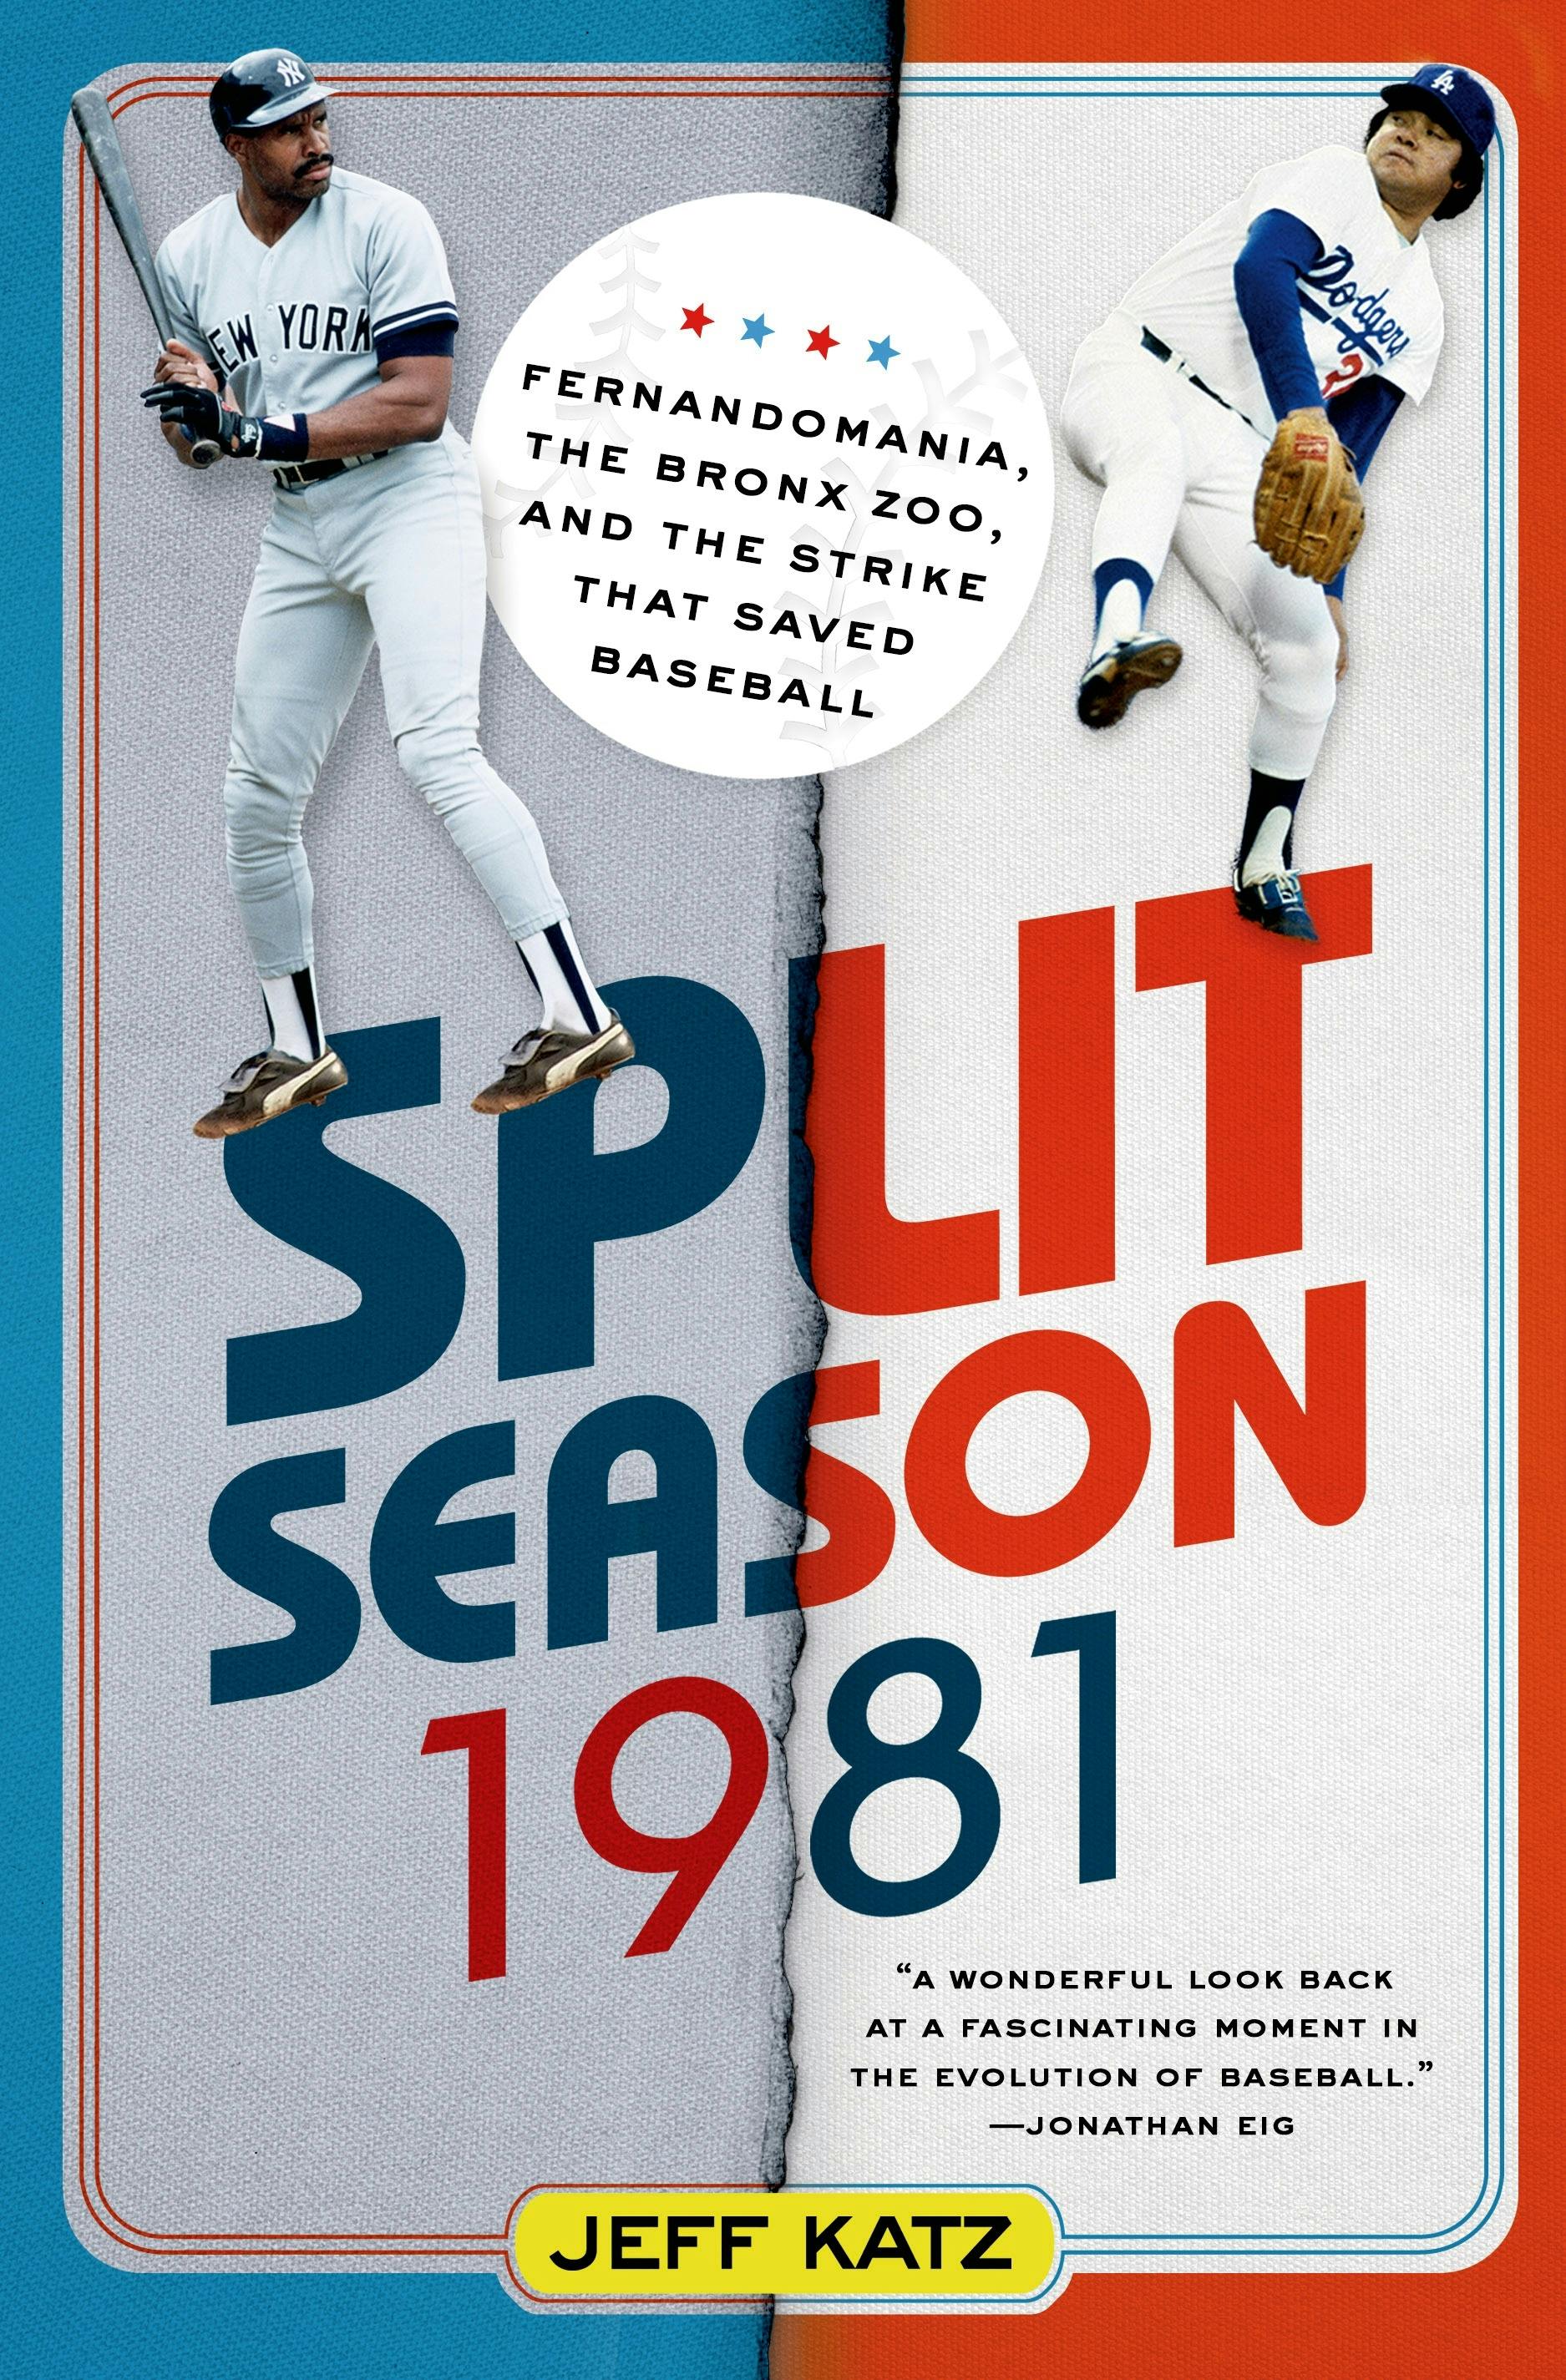 In 1981, baseball stopped and a great Phillies team never